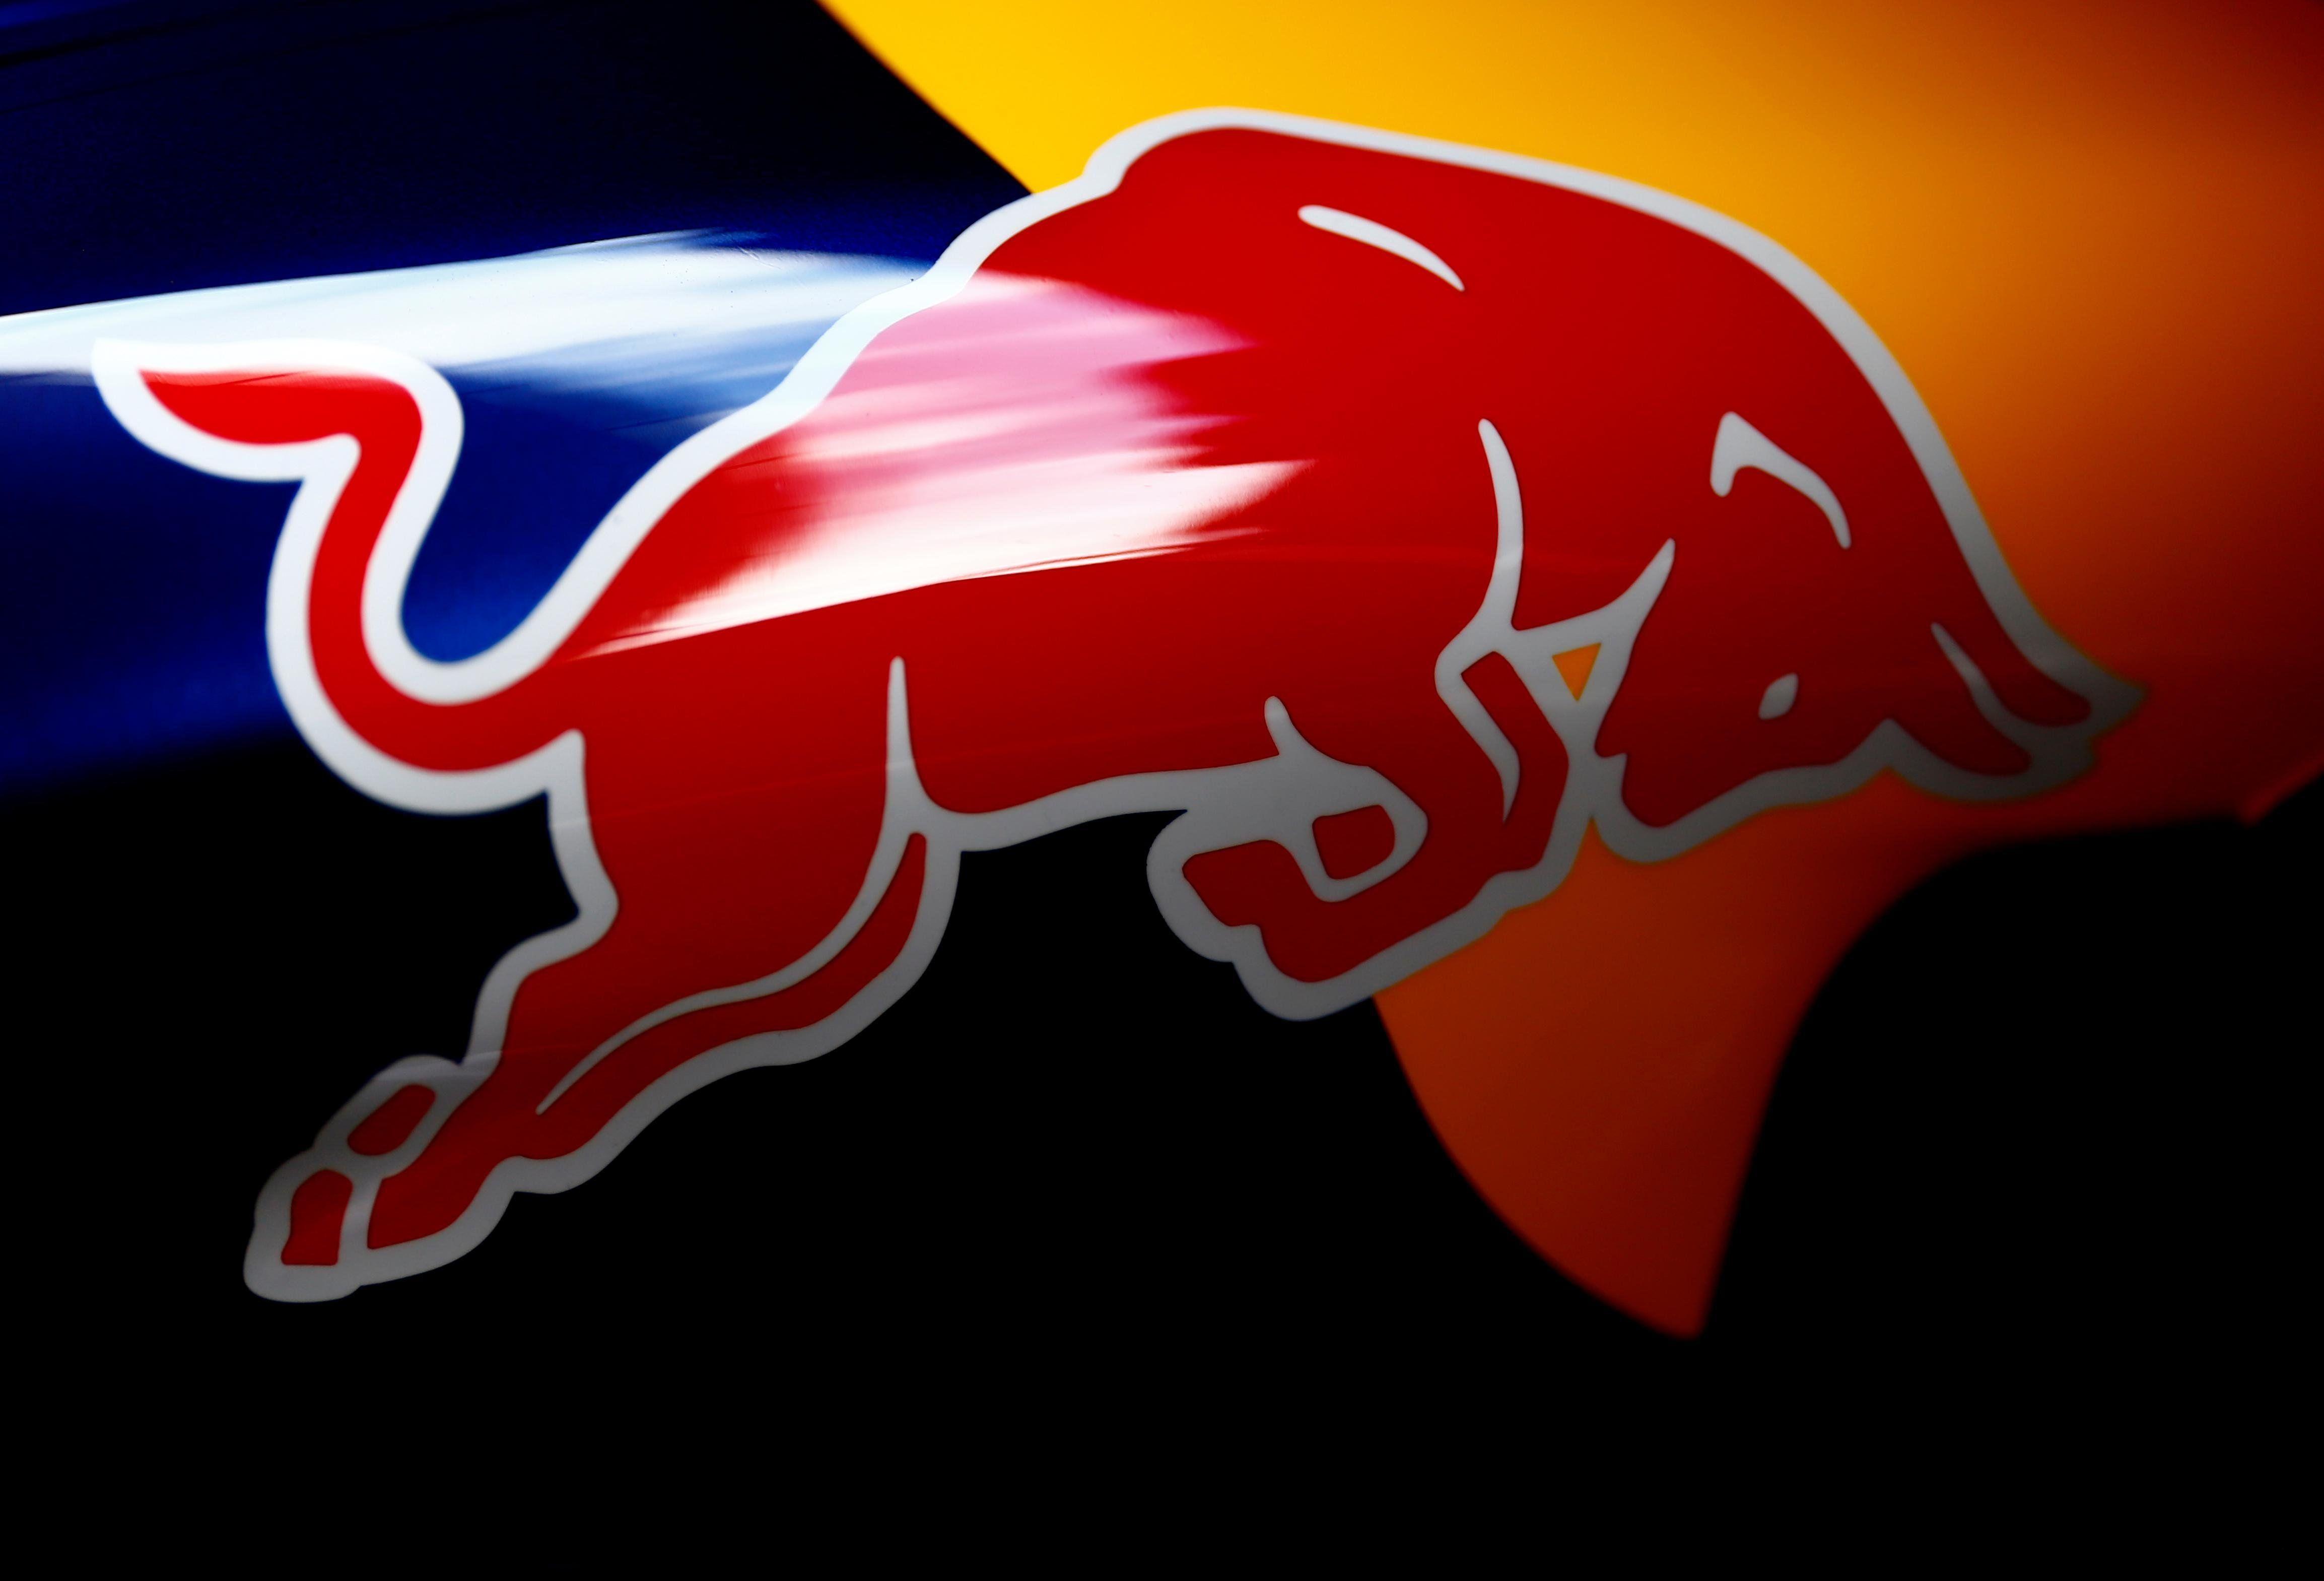 Red Bull Racing Logo - Countdown to the RB10